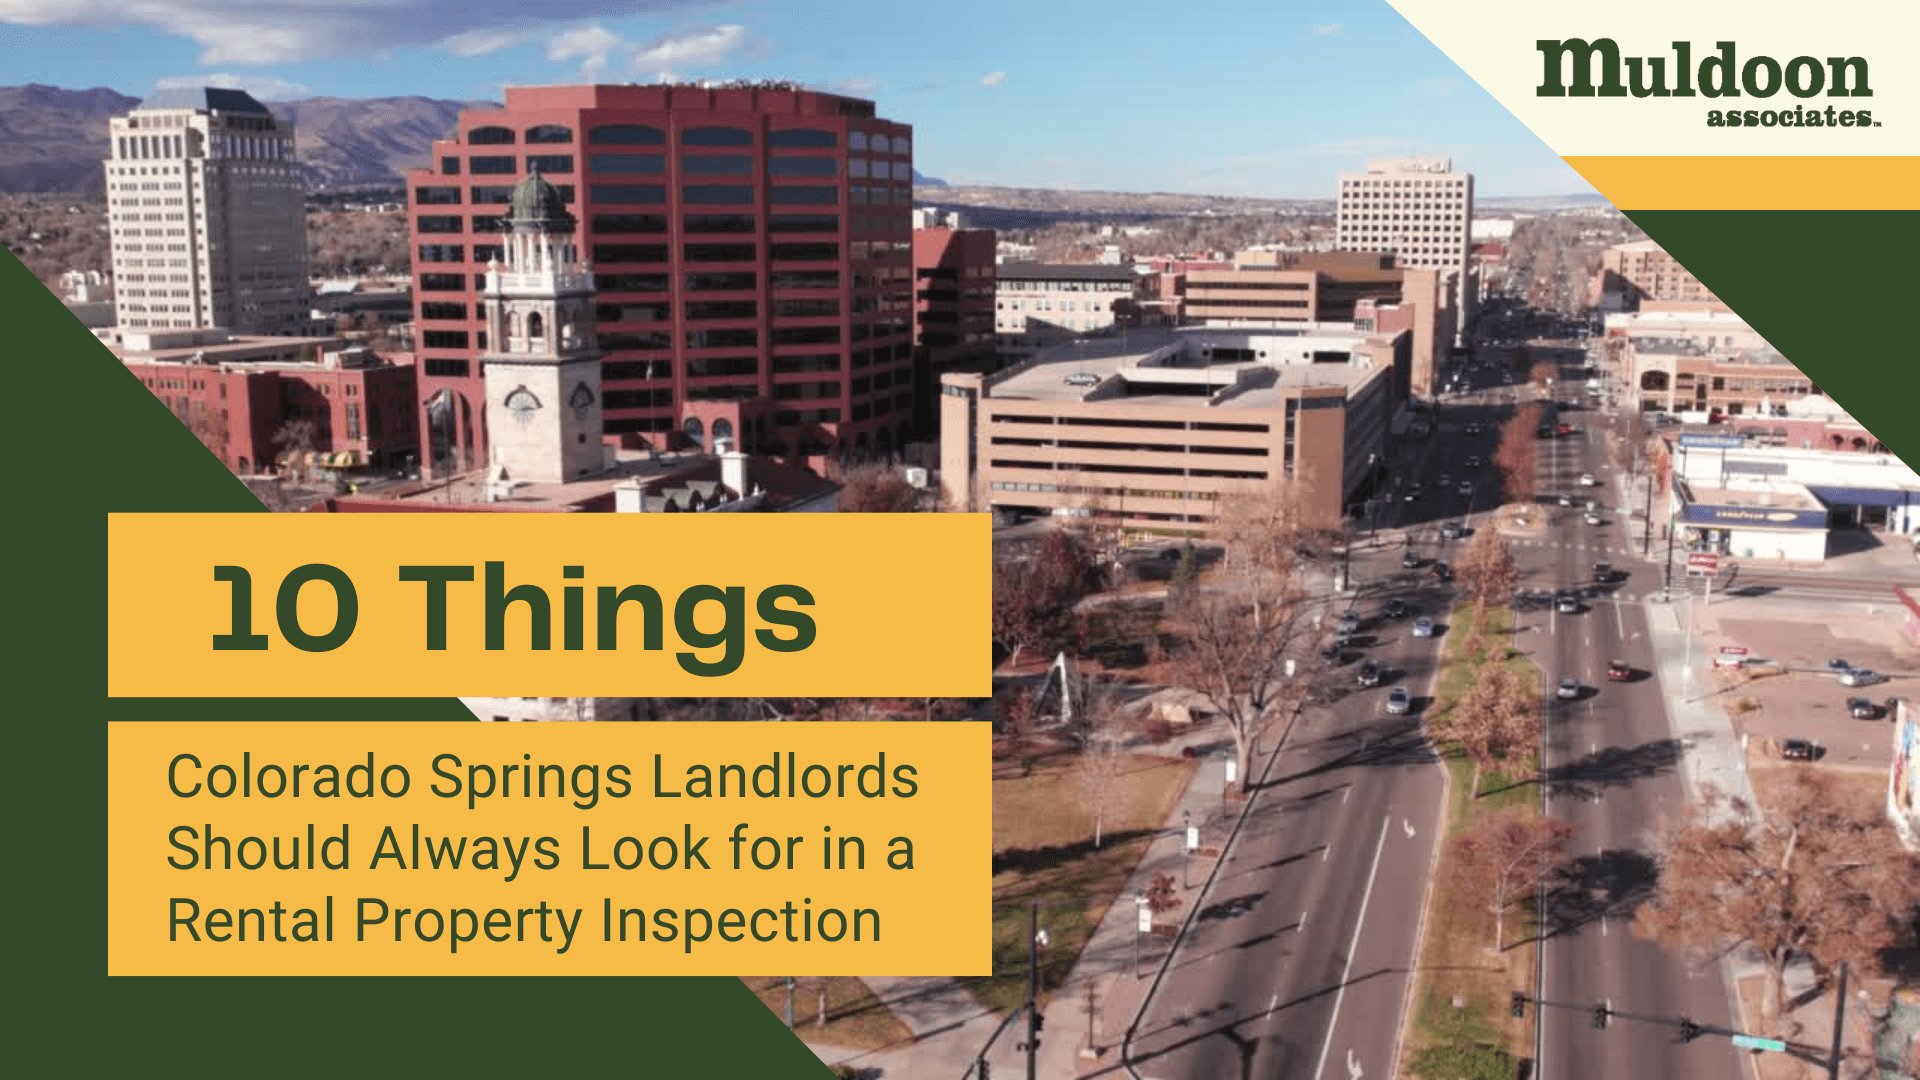 10 Things Colorado Springs Landlords Should Always Look for in a Rental Property Inspection